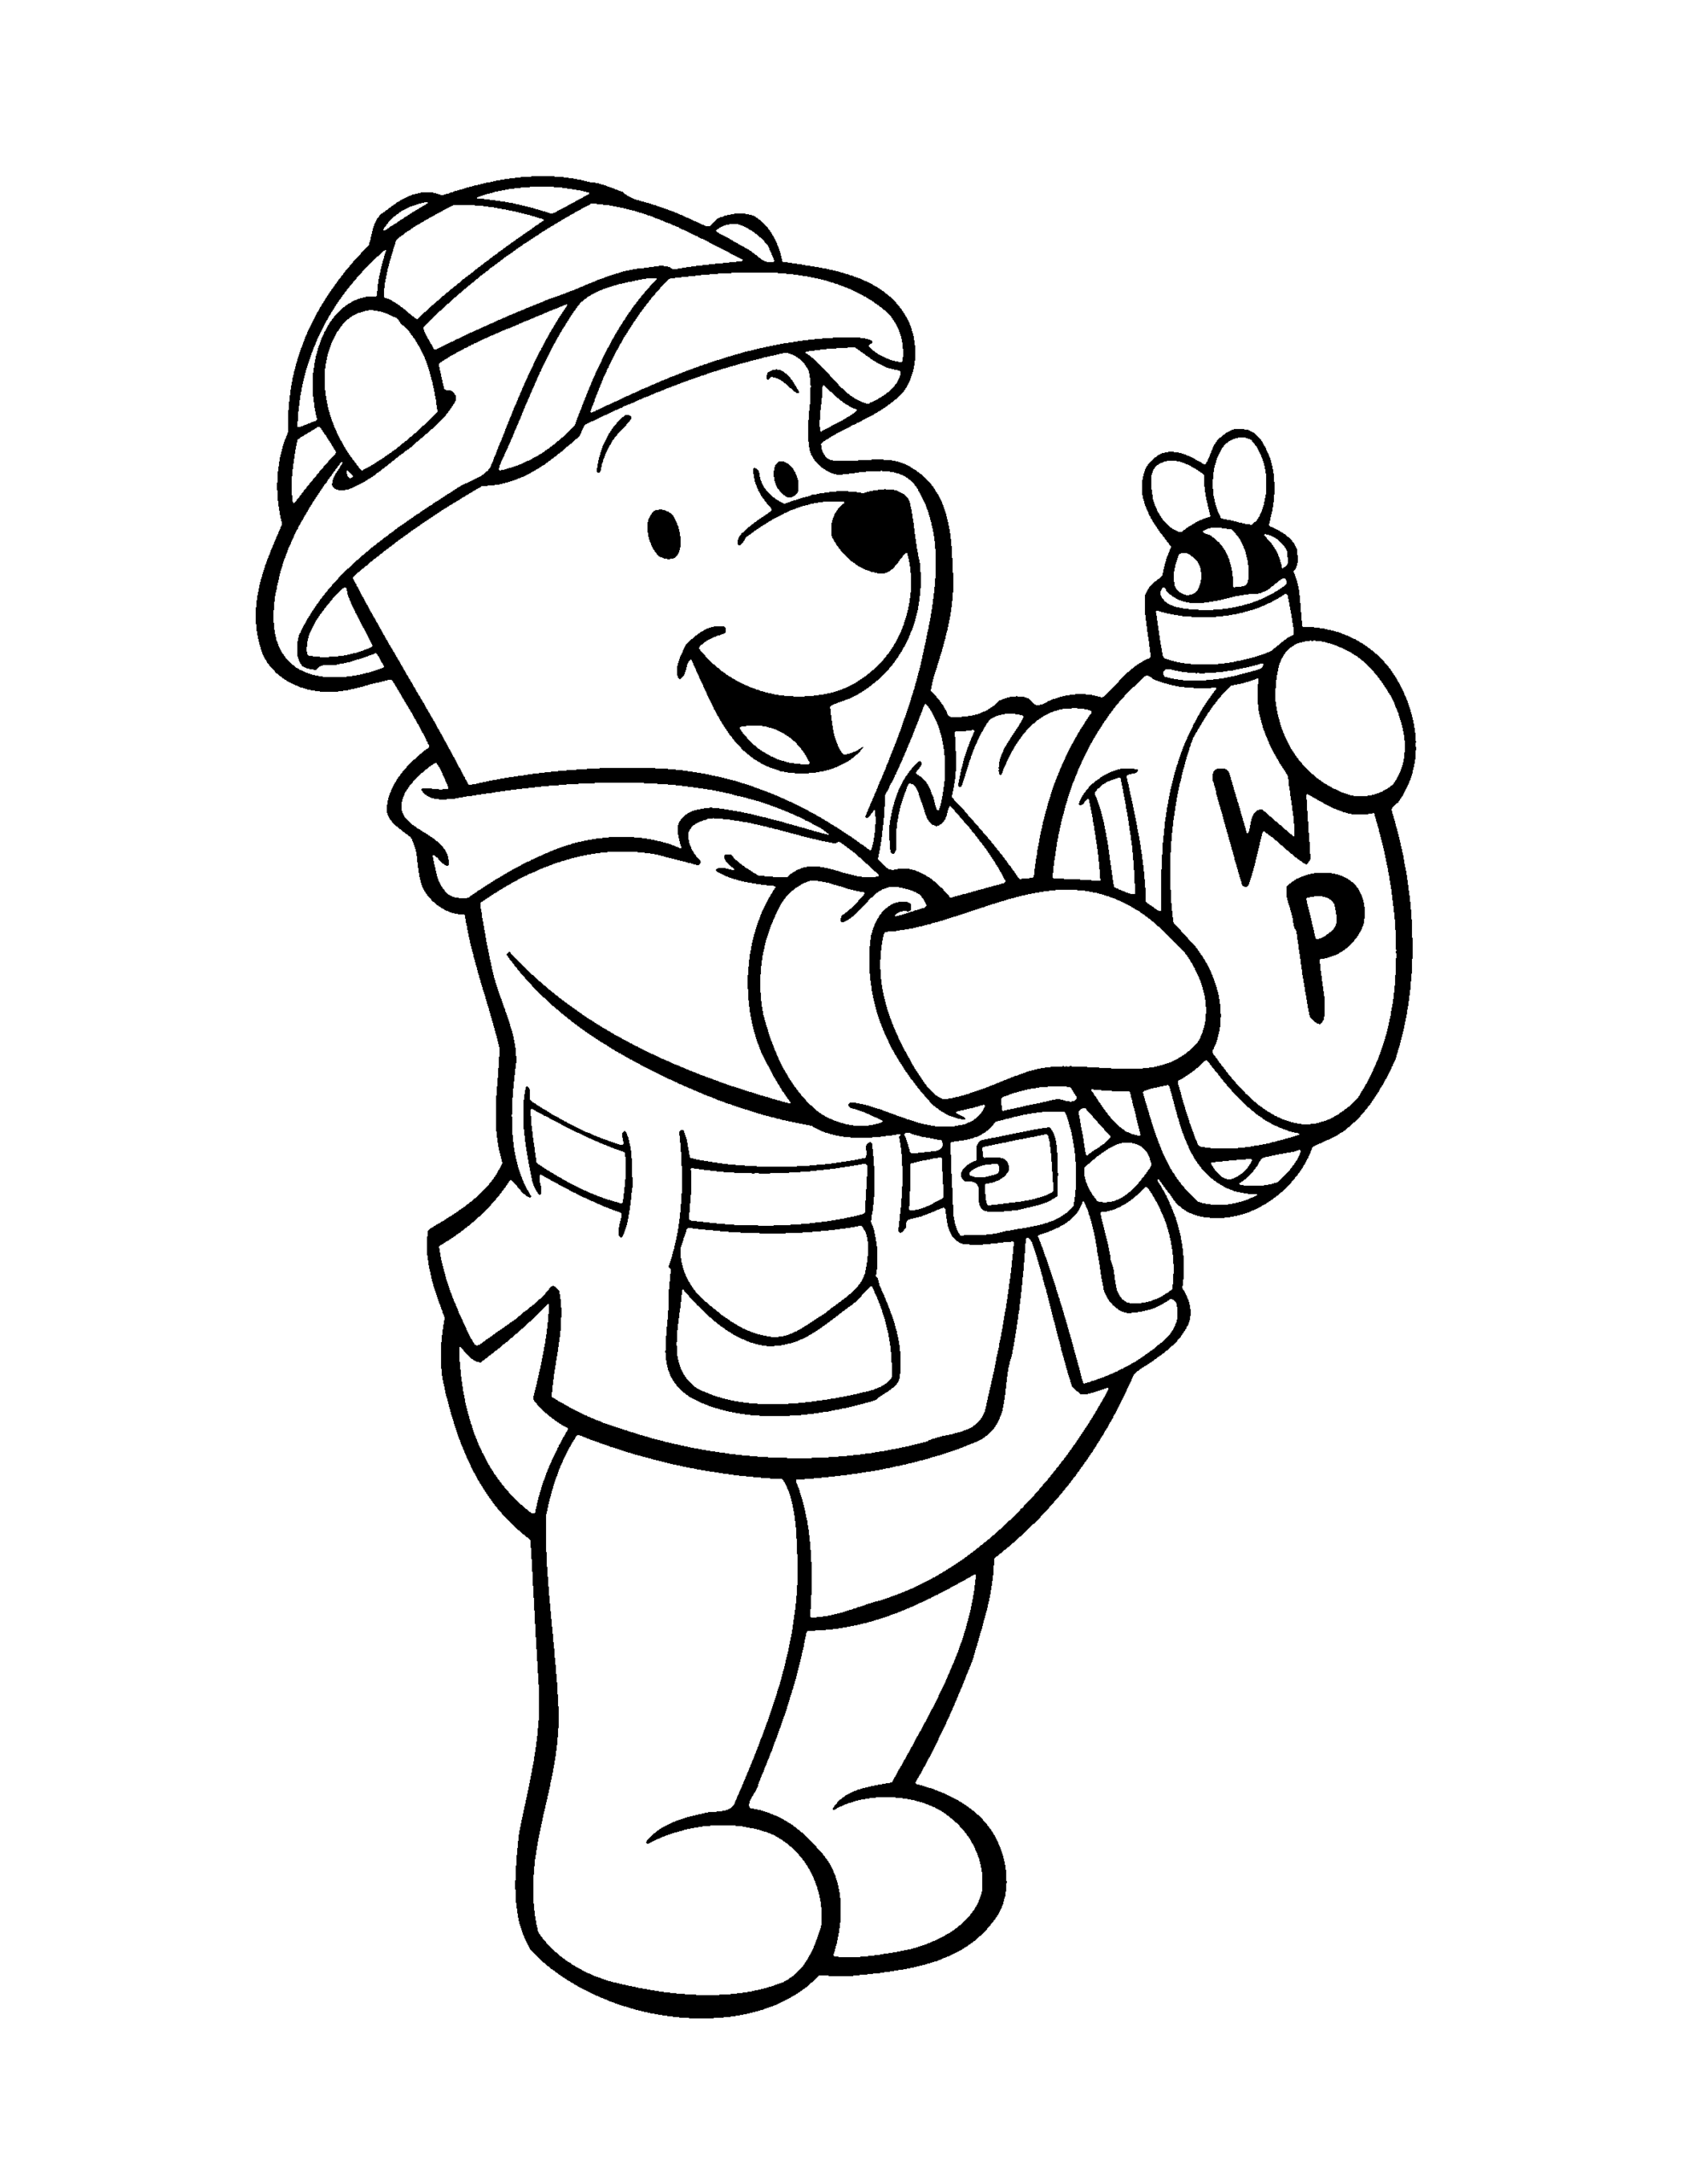 Winnie the Pooh Coloring Pages Cartoons winnie the pooh 83 Printable 2020 7204 Coloring4free